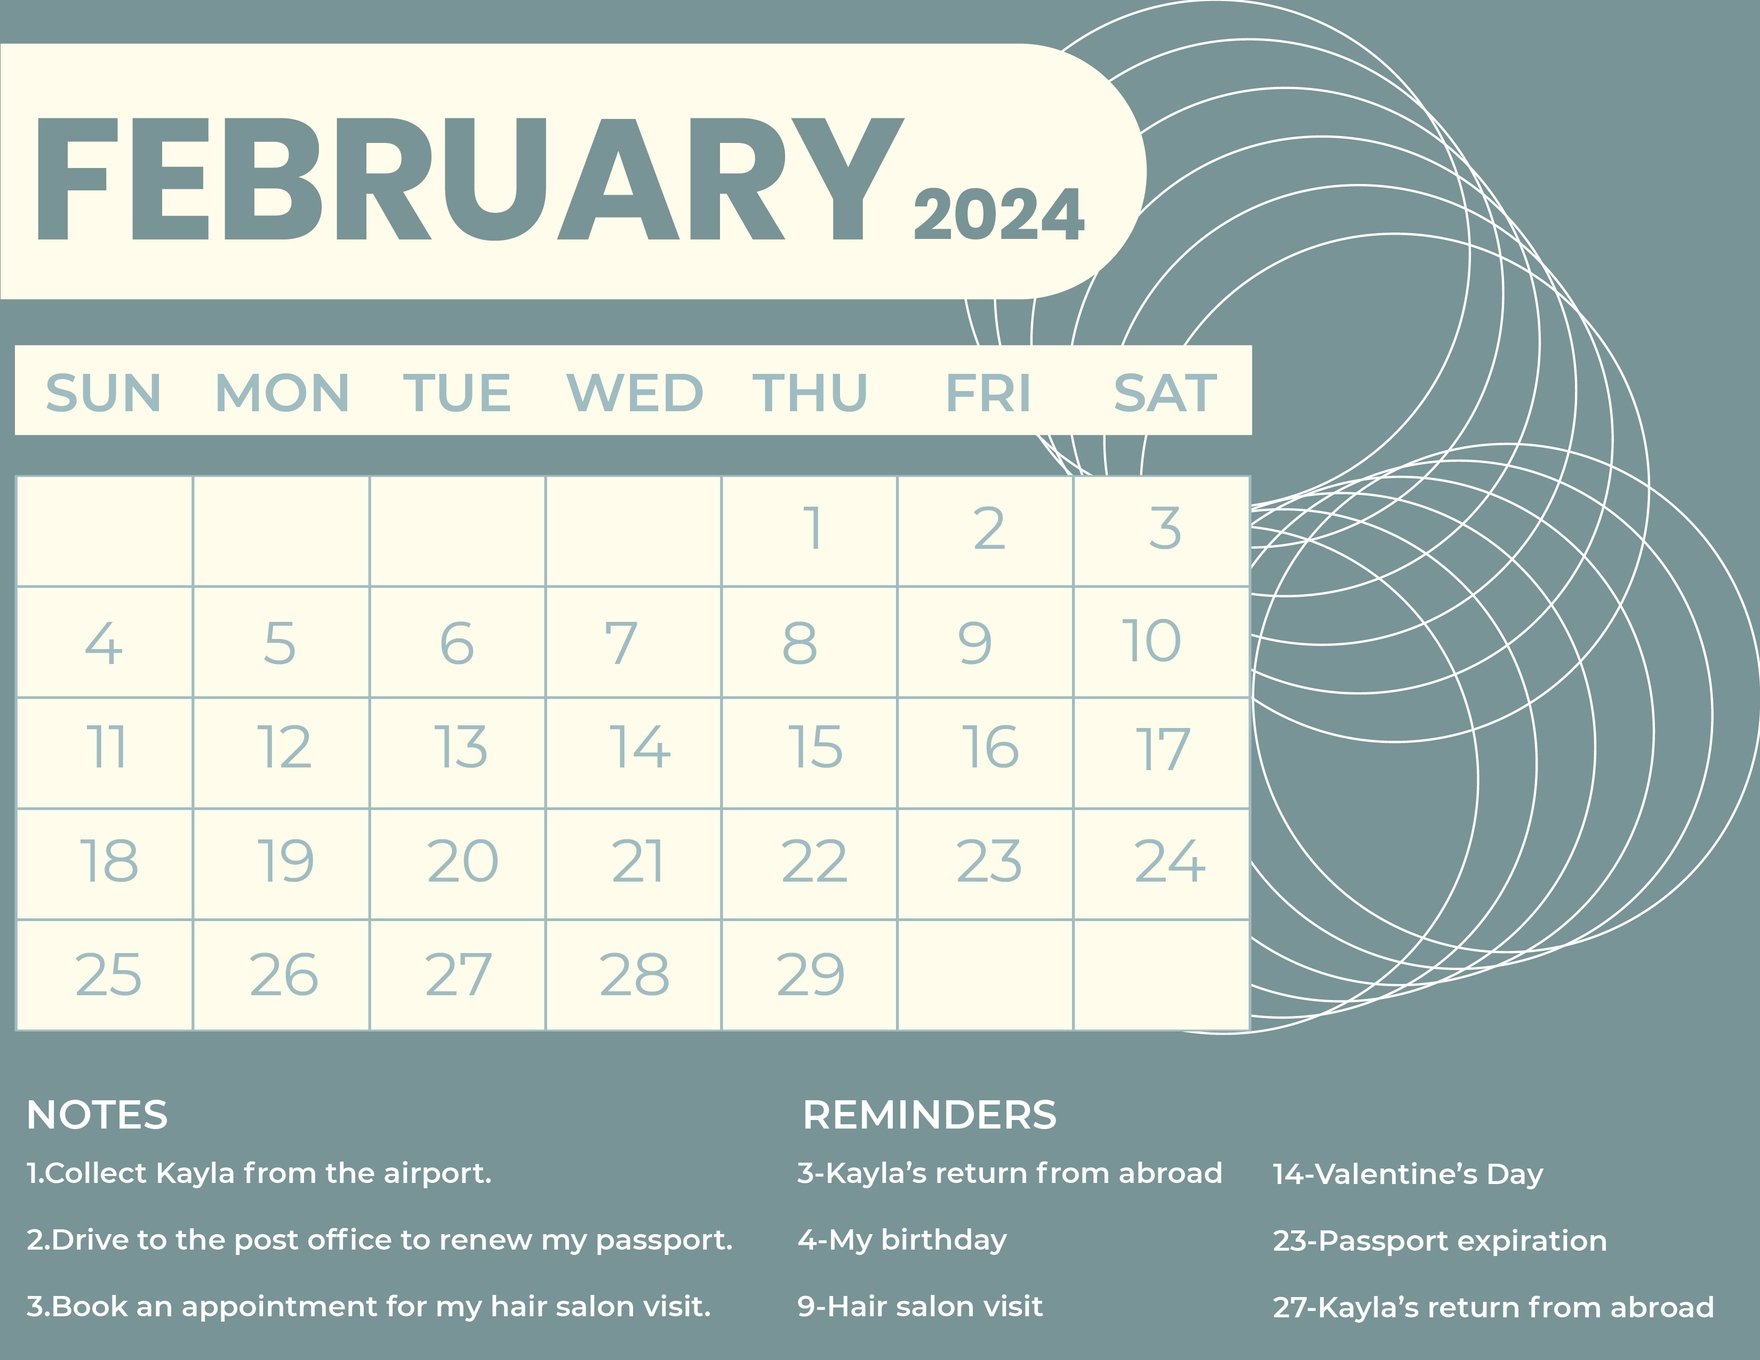 February 2024 Calendar in Word FREE Template Download